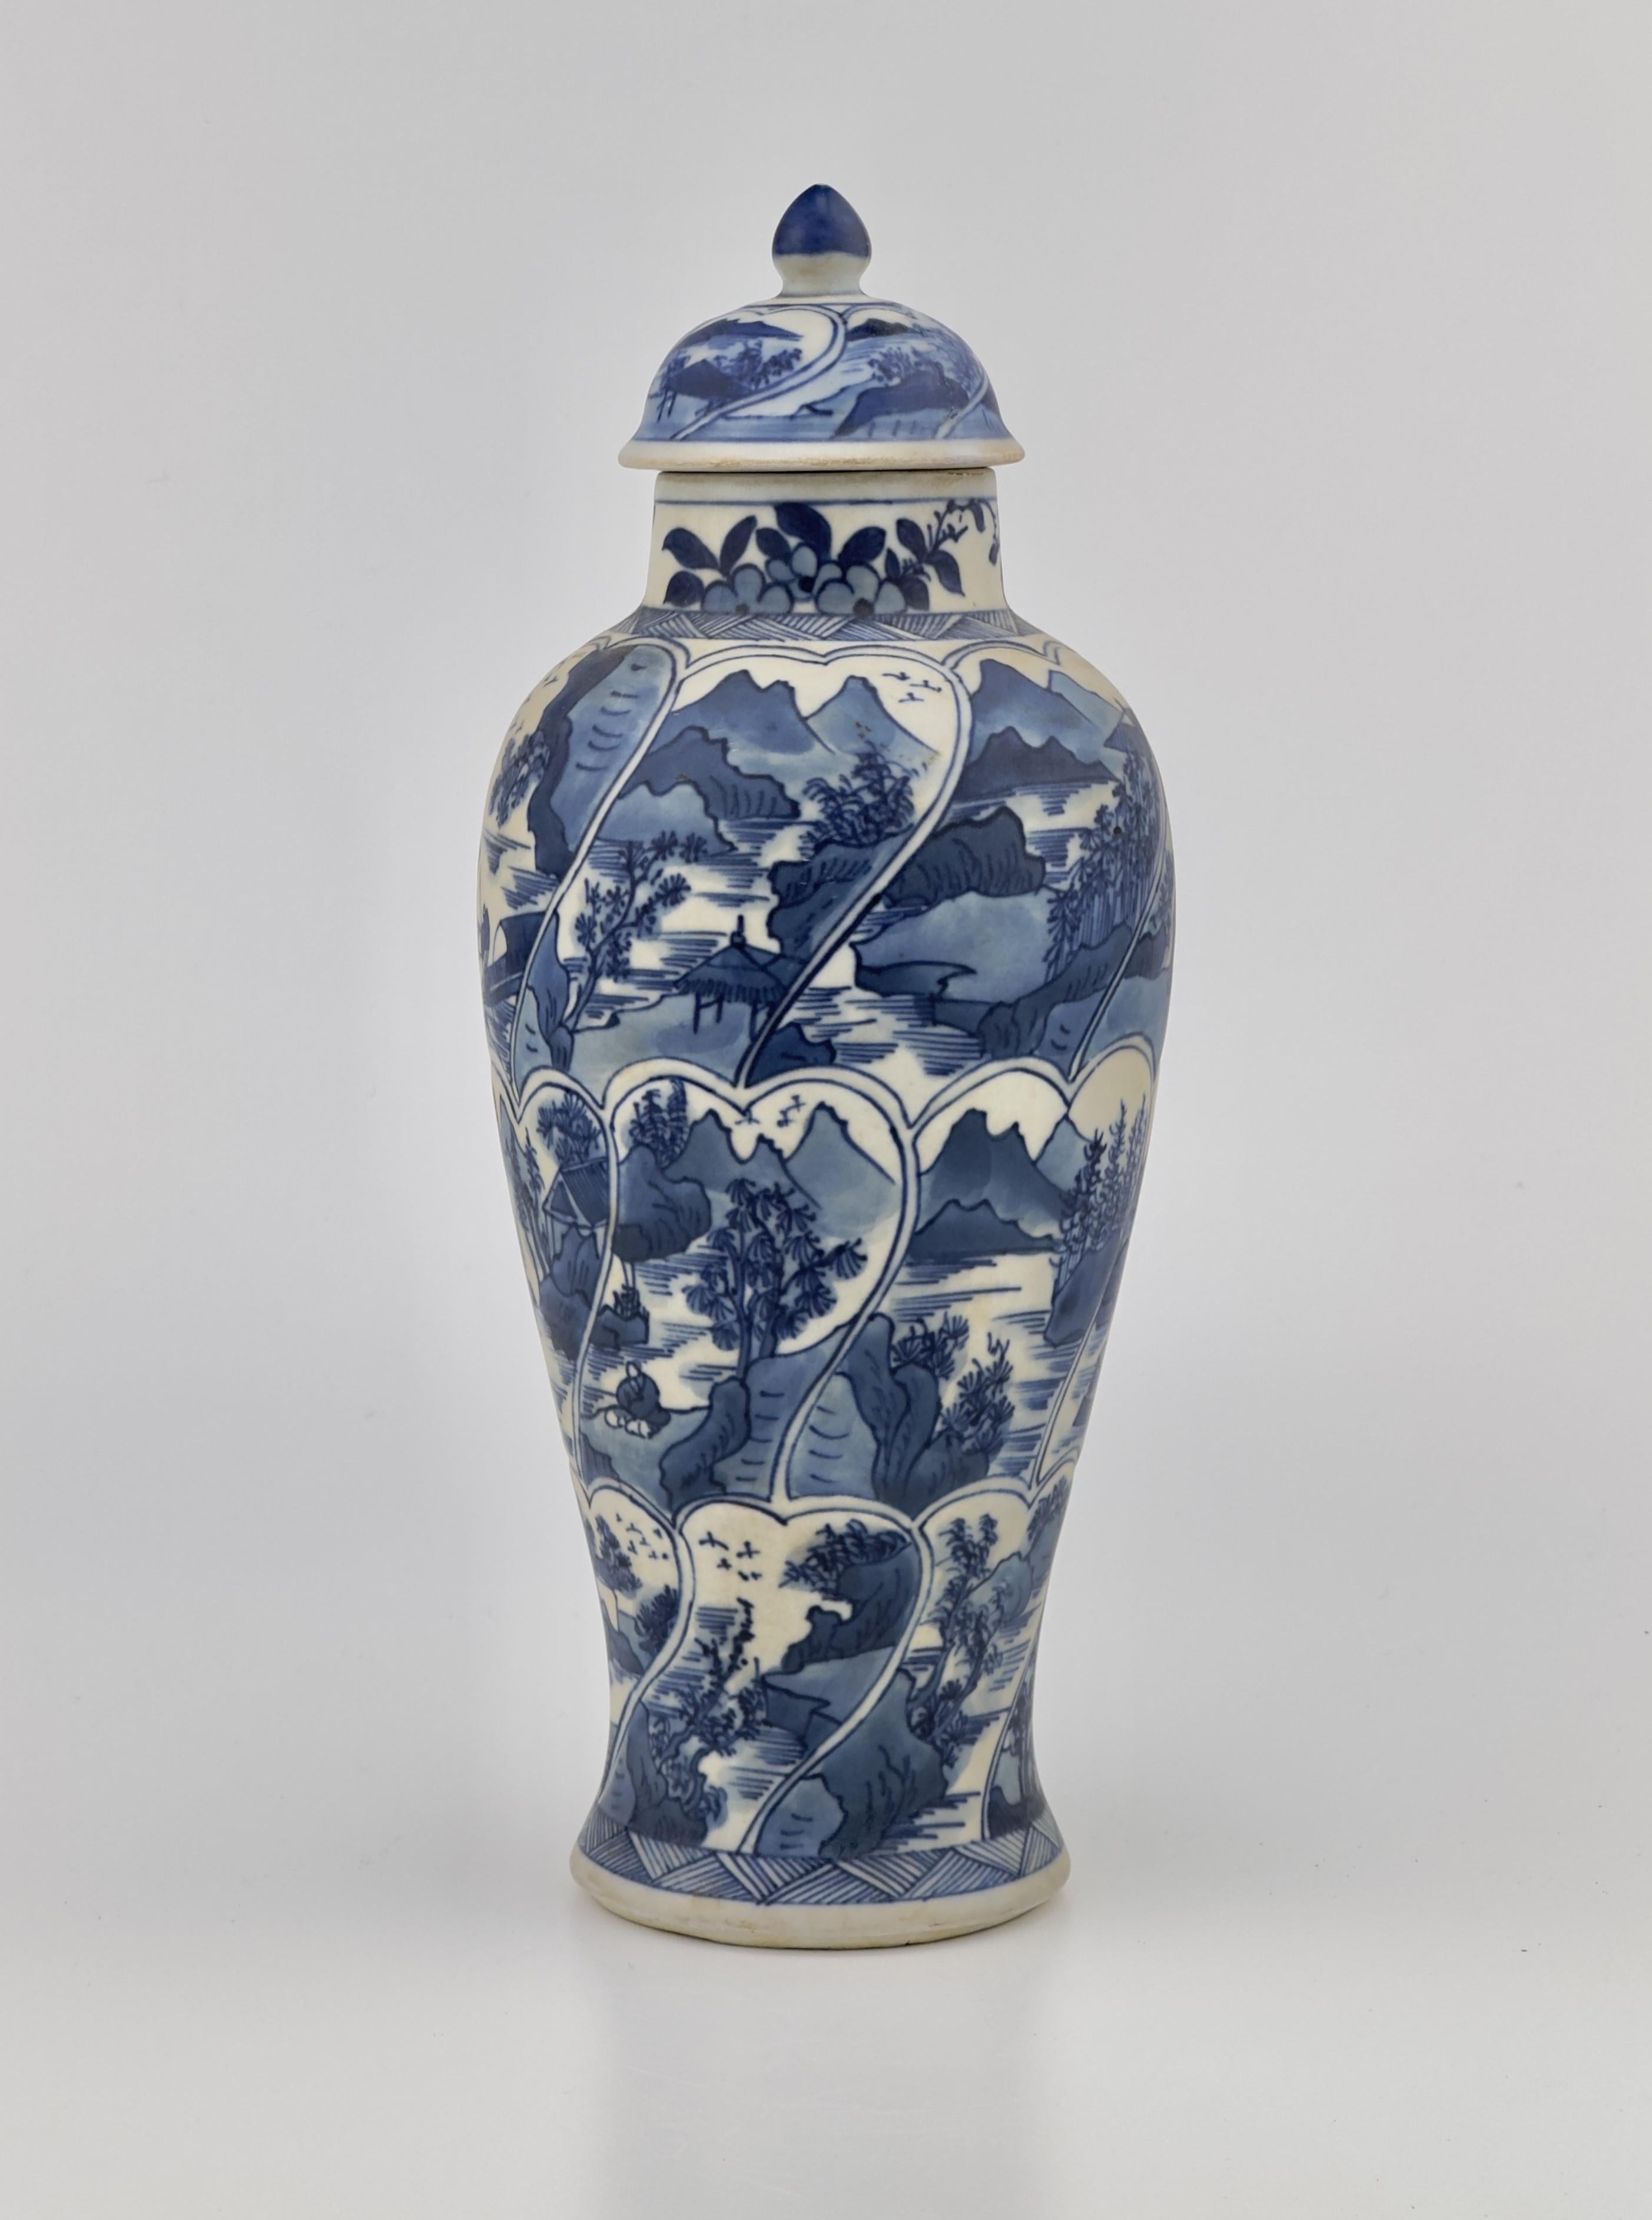 Spirally moulded and painted with bands of overlapping petal panels of figured riverscapes

Period : Qing Dynasty, Kangxi Period
Production Date : 1690-1699
Made in : Jingdezhen
Destination : Netherland
Found/Acquired : Southeast Asia , South China